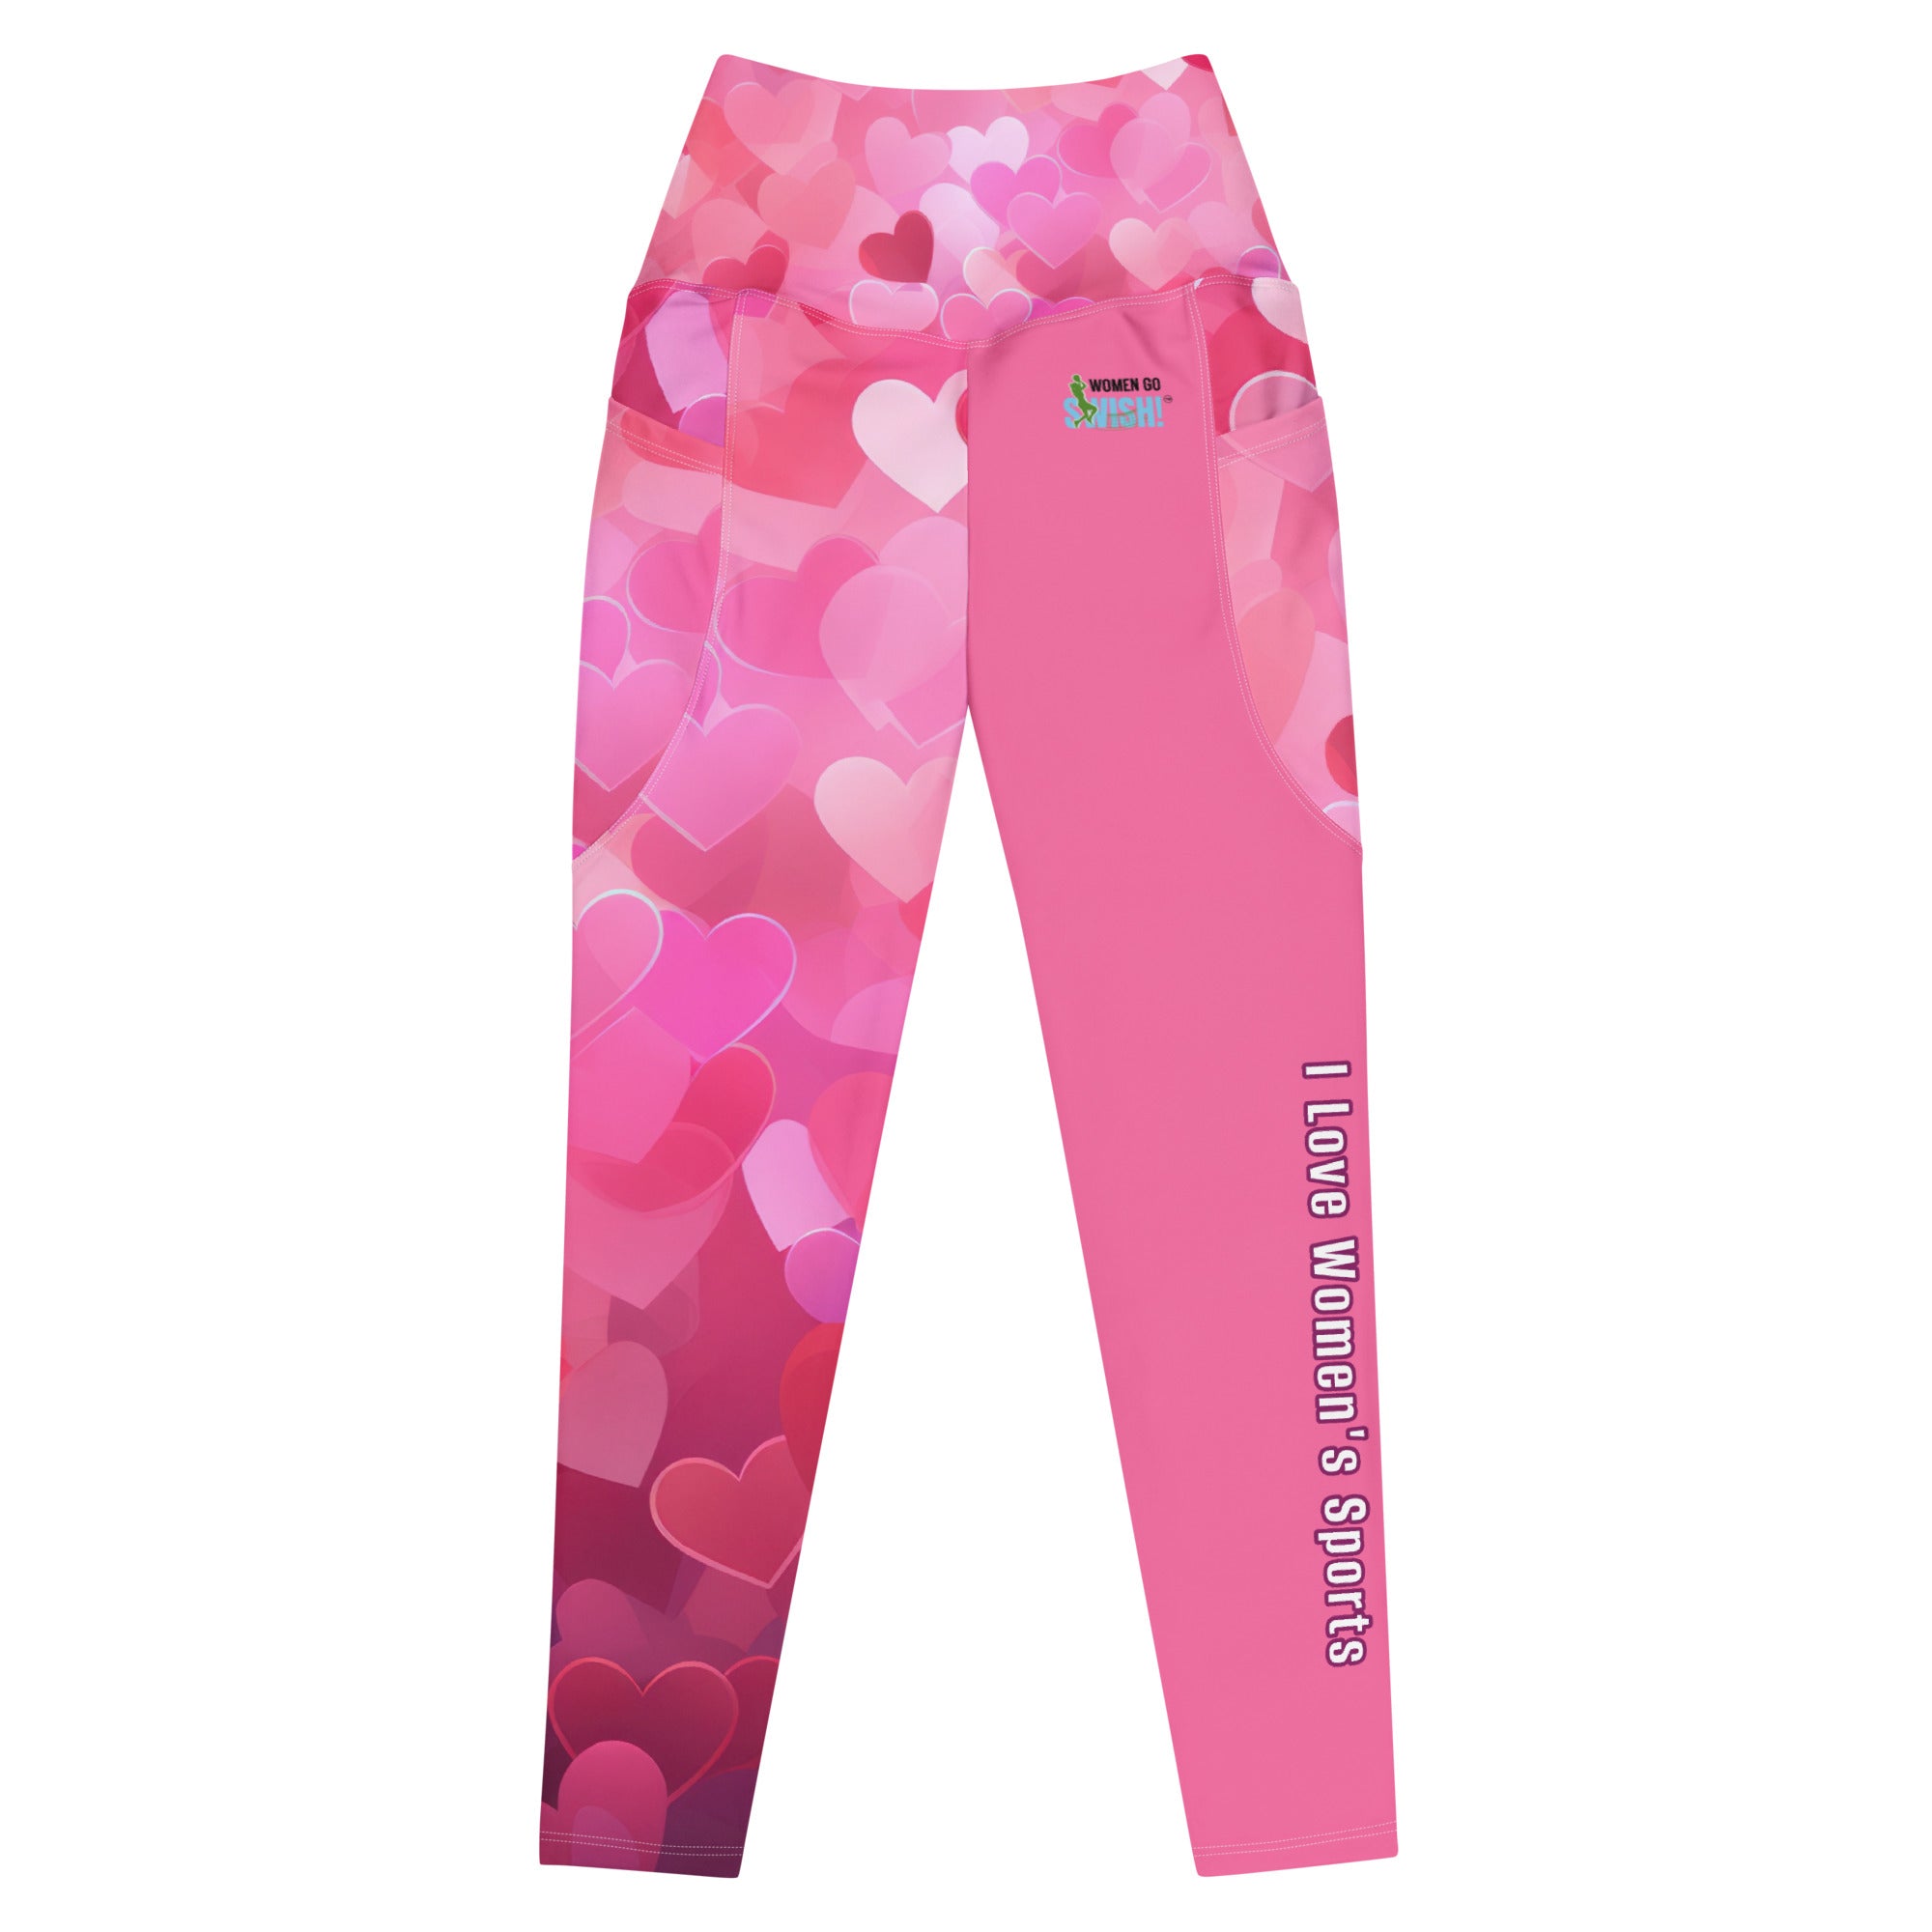 "I Love Women's Sports" Multi-pink Leggings with Pockets